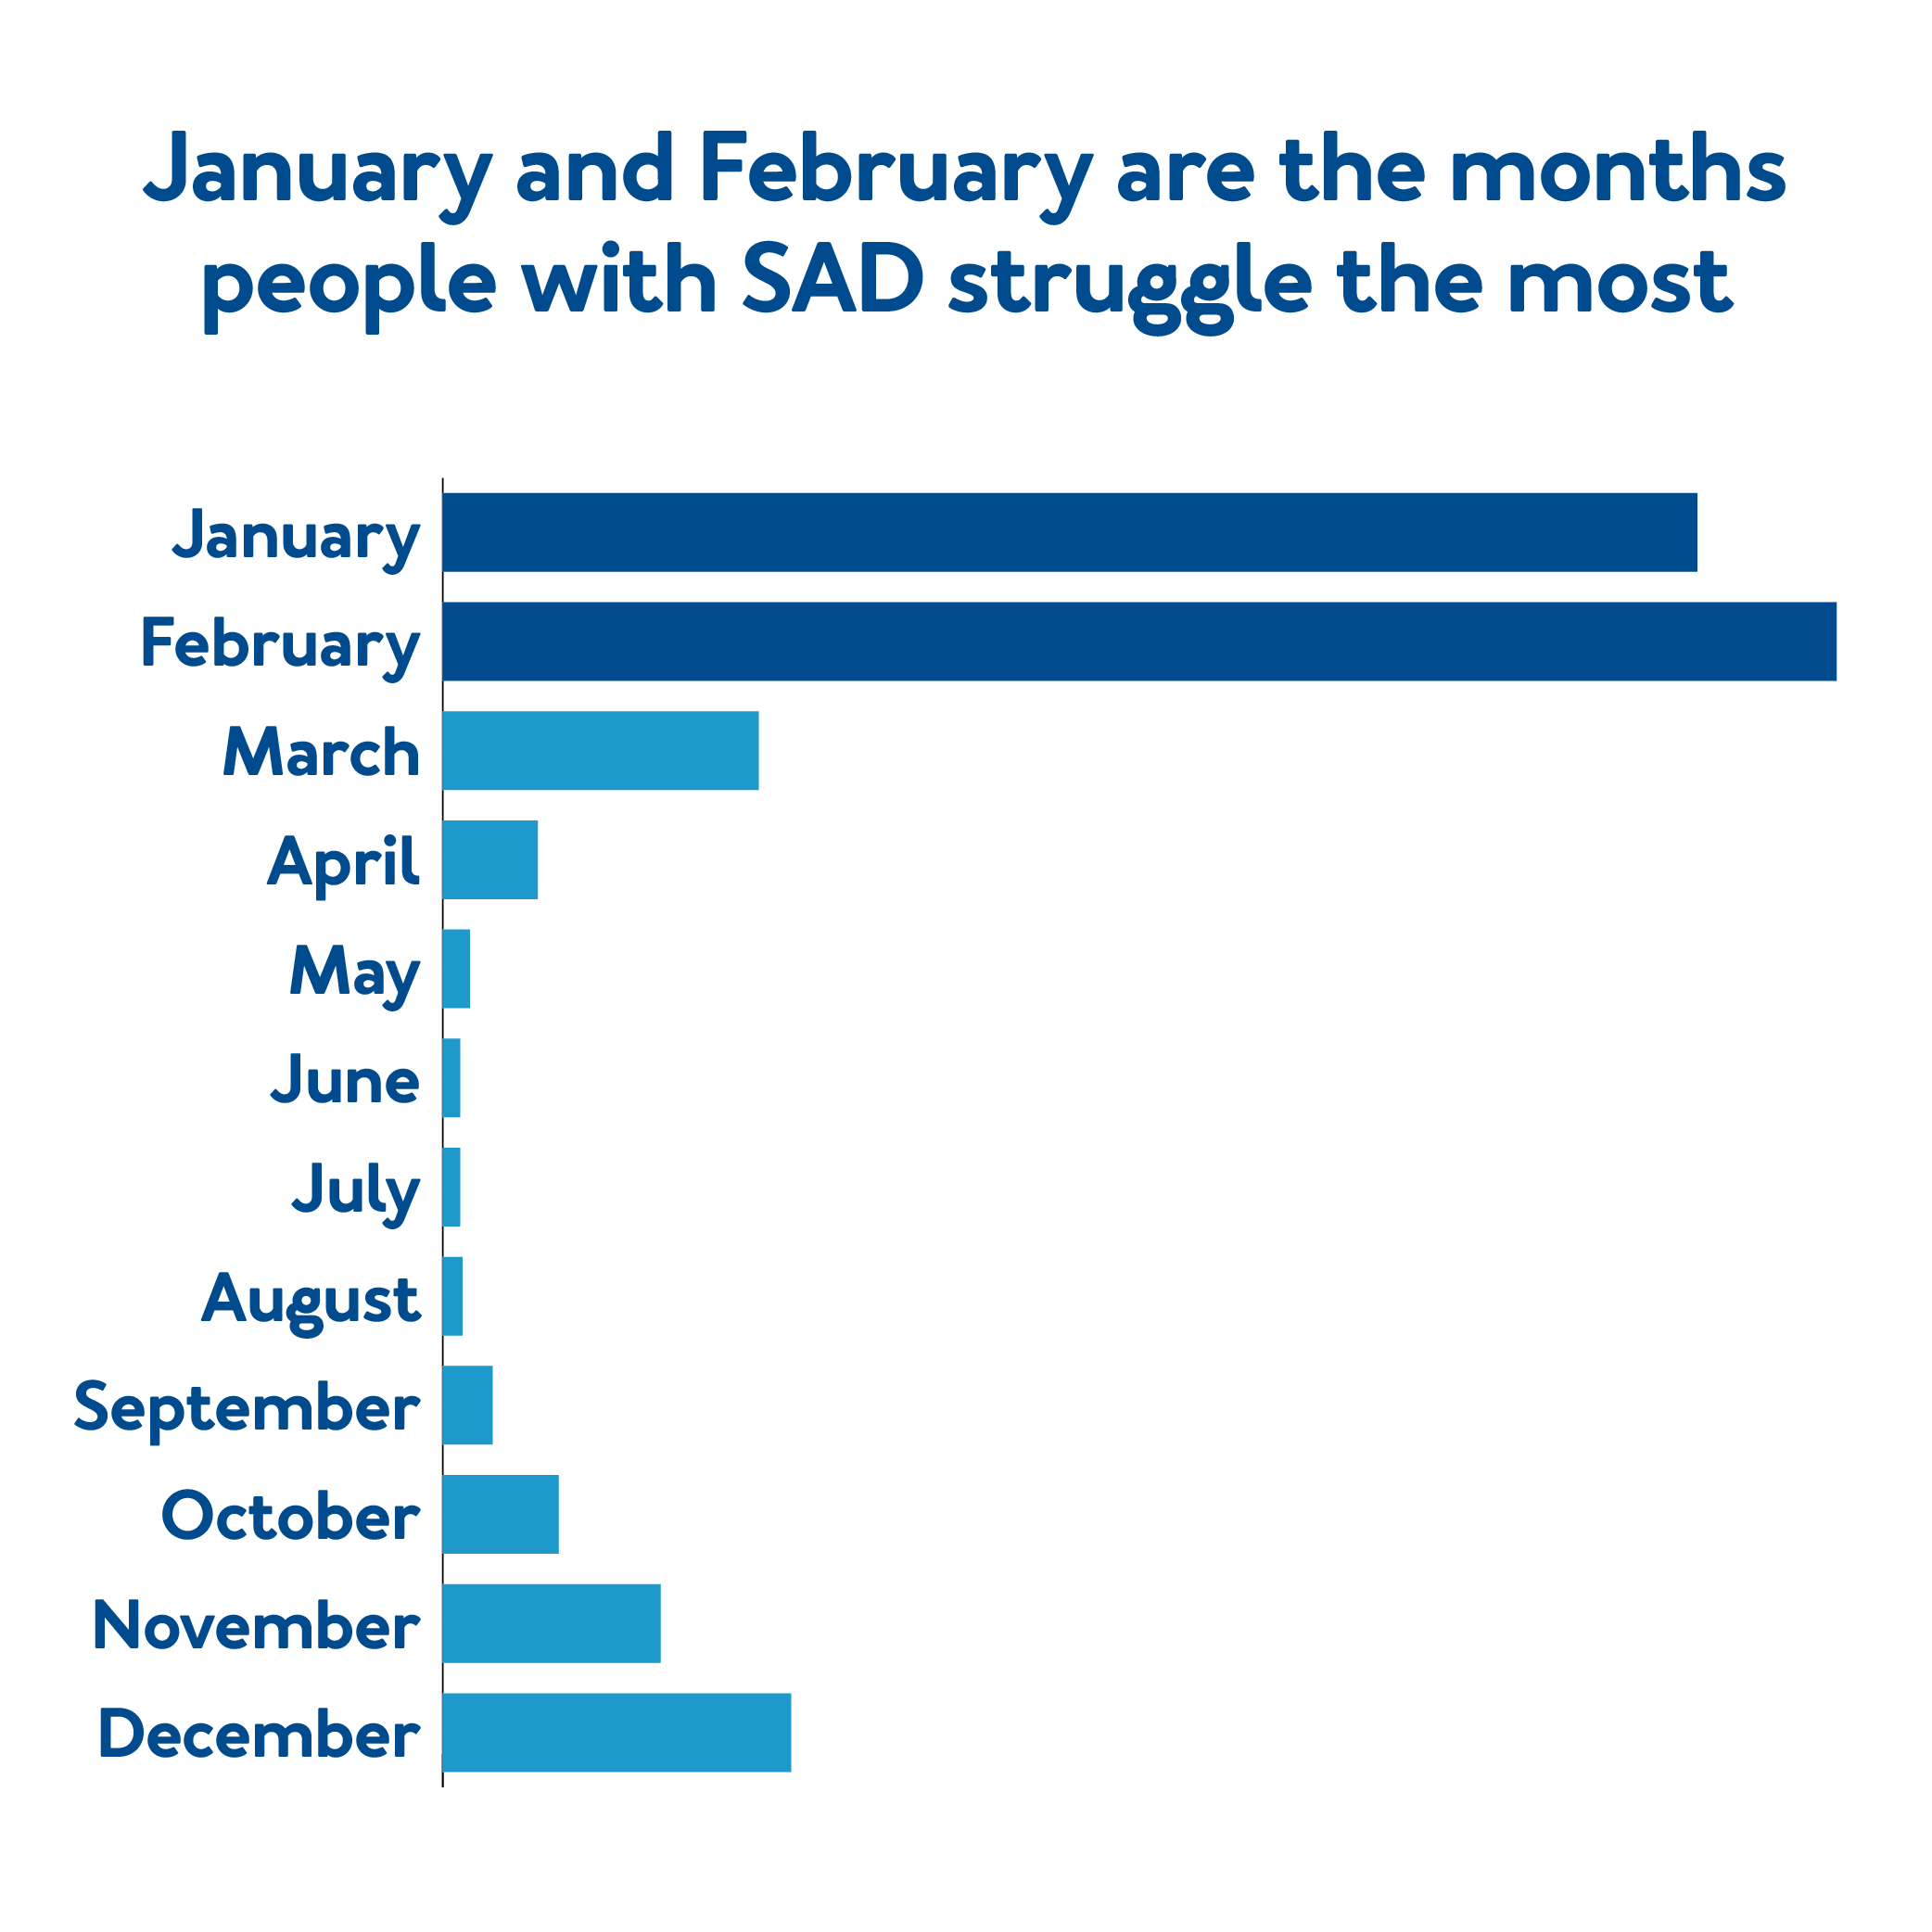 January and February are the months people with SAD struggle the most.